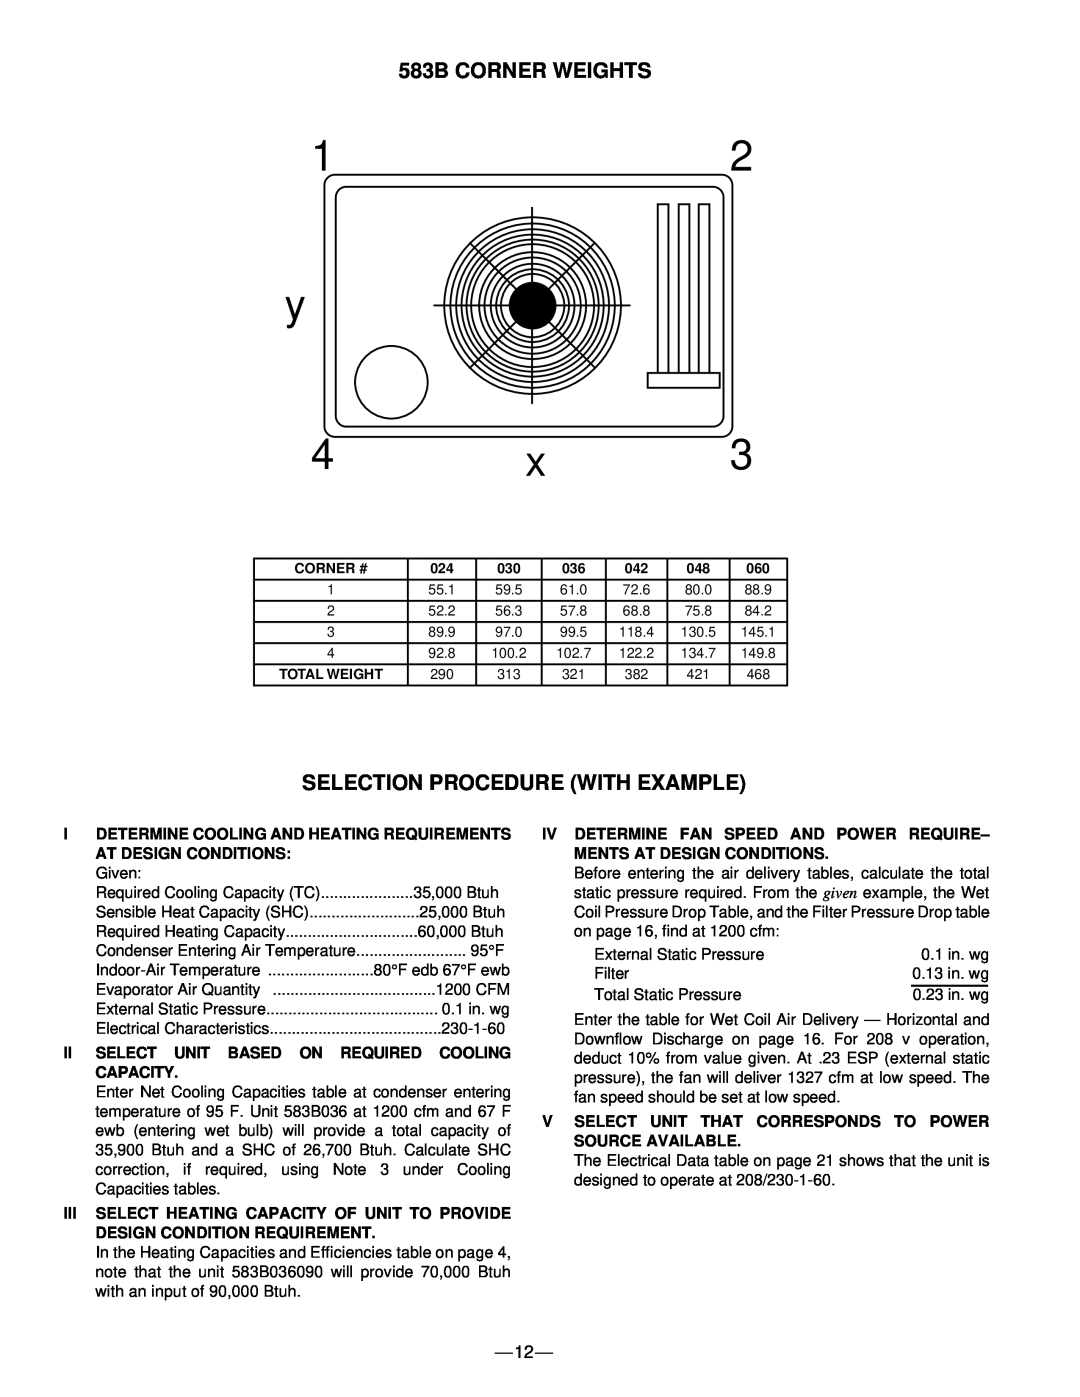 Bryant manual 583B CORNER WEIGHTS, Selection Procedure With Example, 12 y, I Determine Cooling And Heating Requirements 